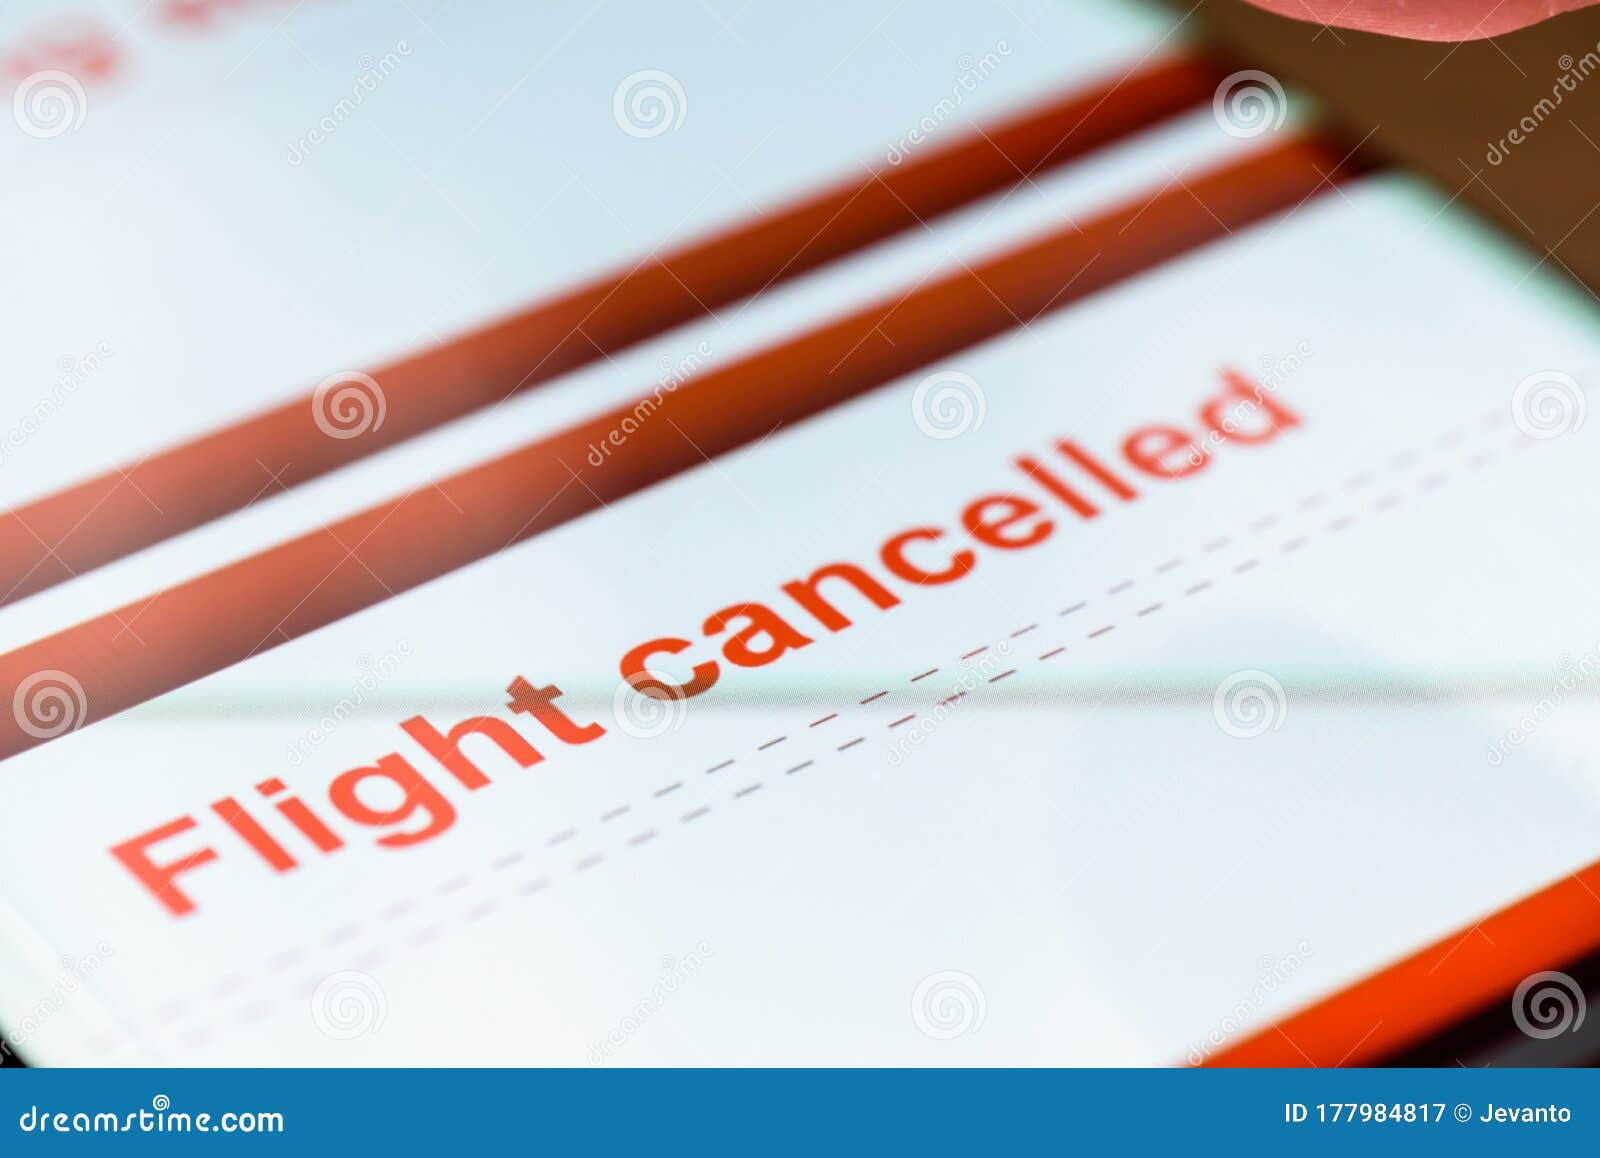 Cancellation flight from SJT to TWF by phone